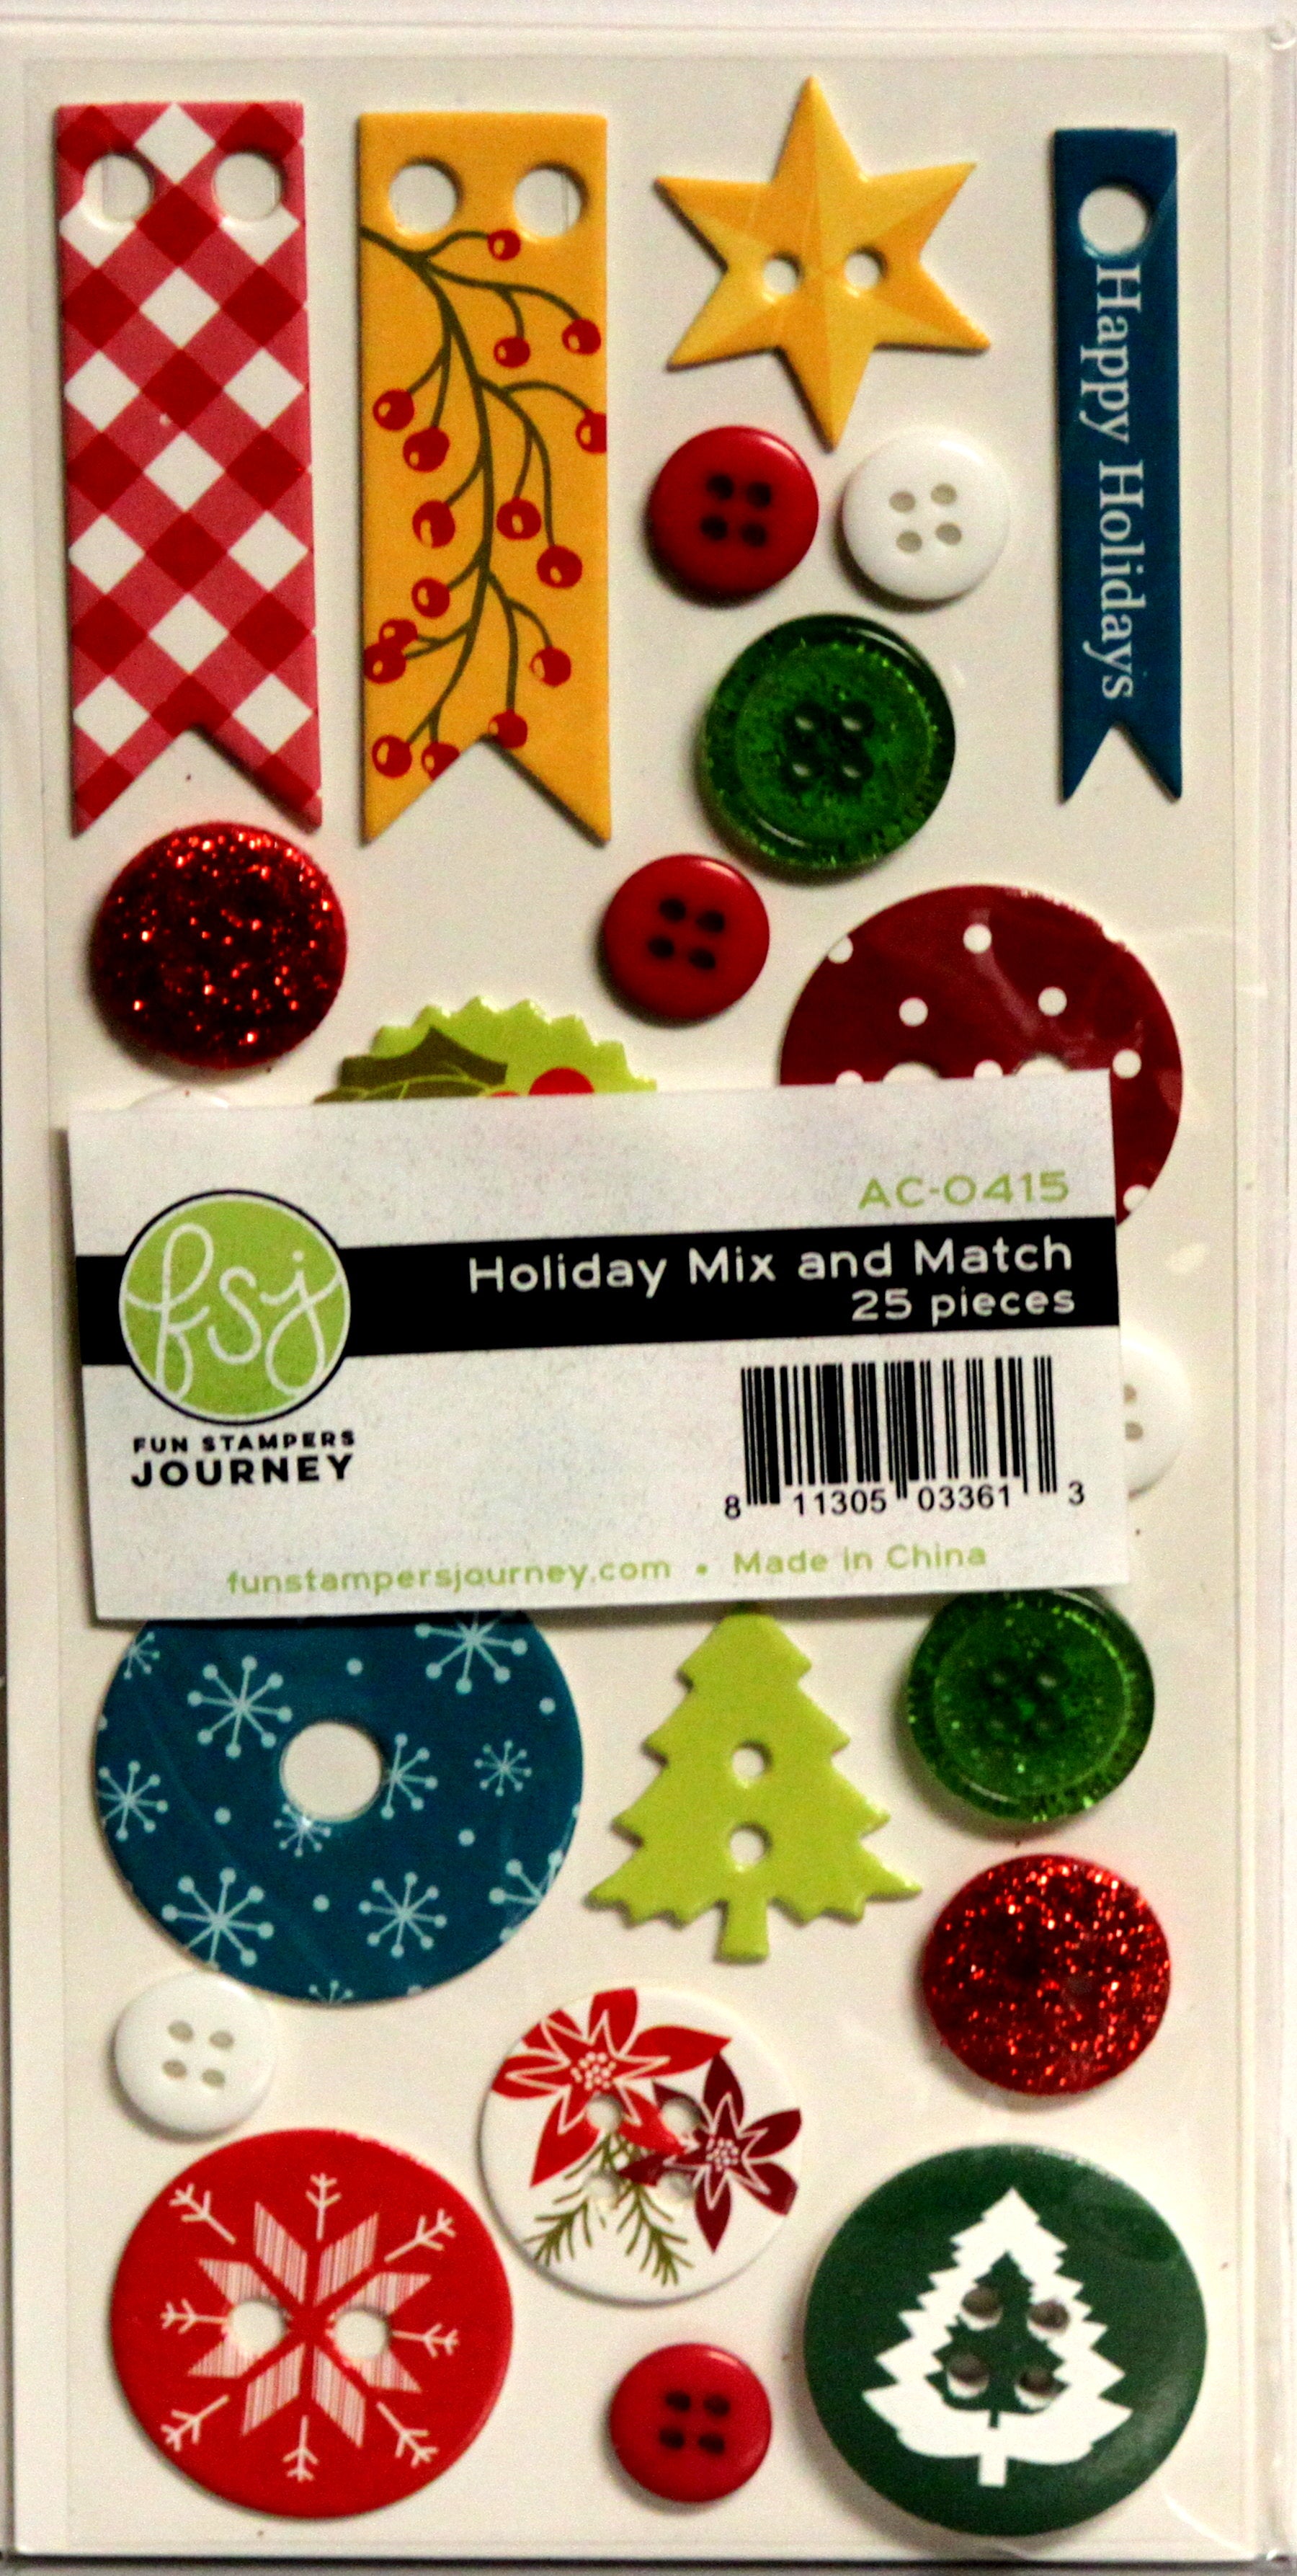 Fun Stampers Journey Holiday Mix and Match Embellishment Set